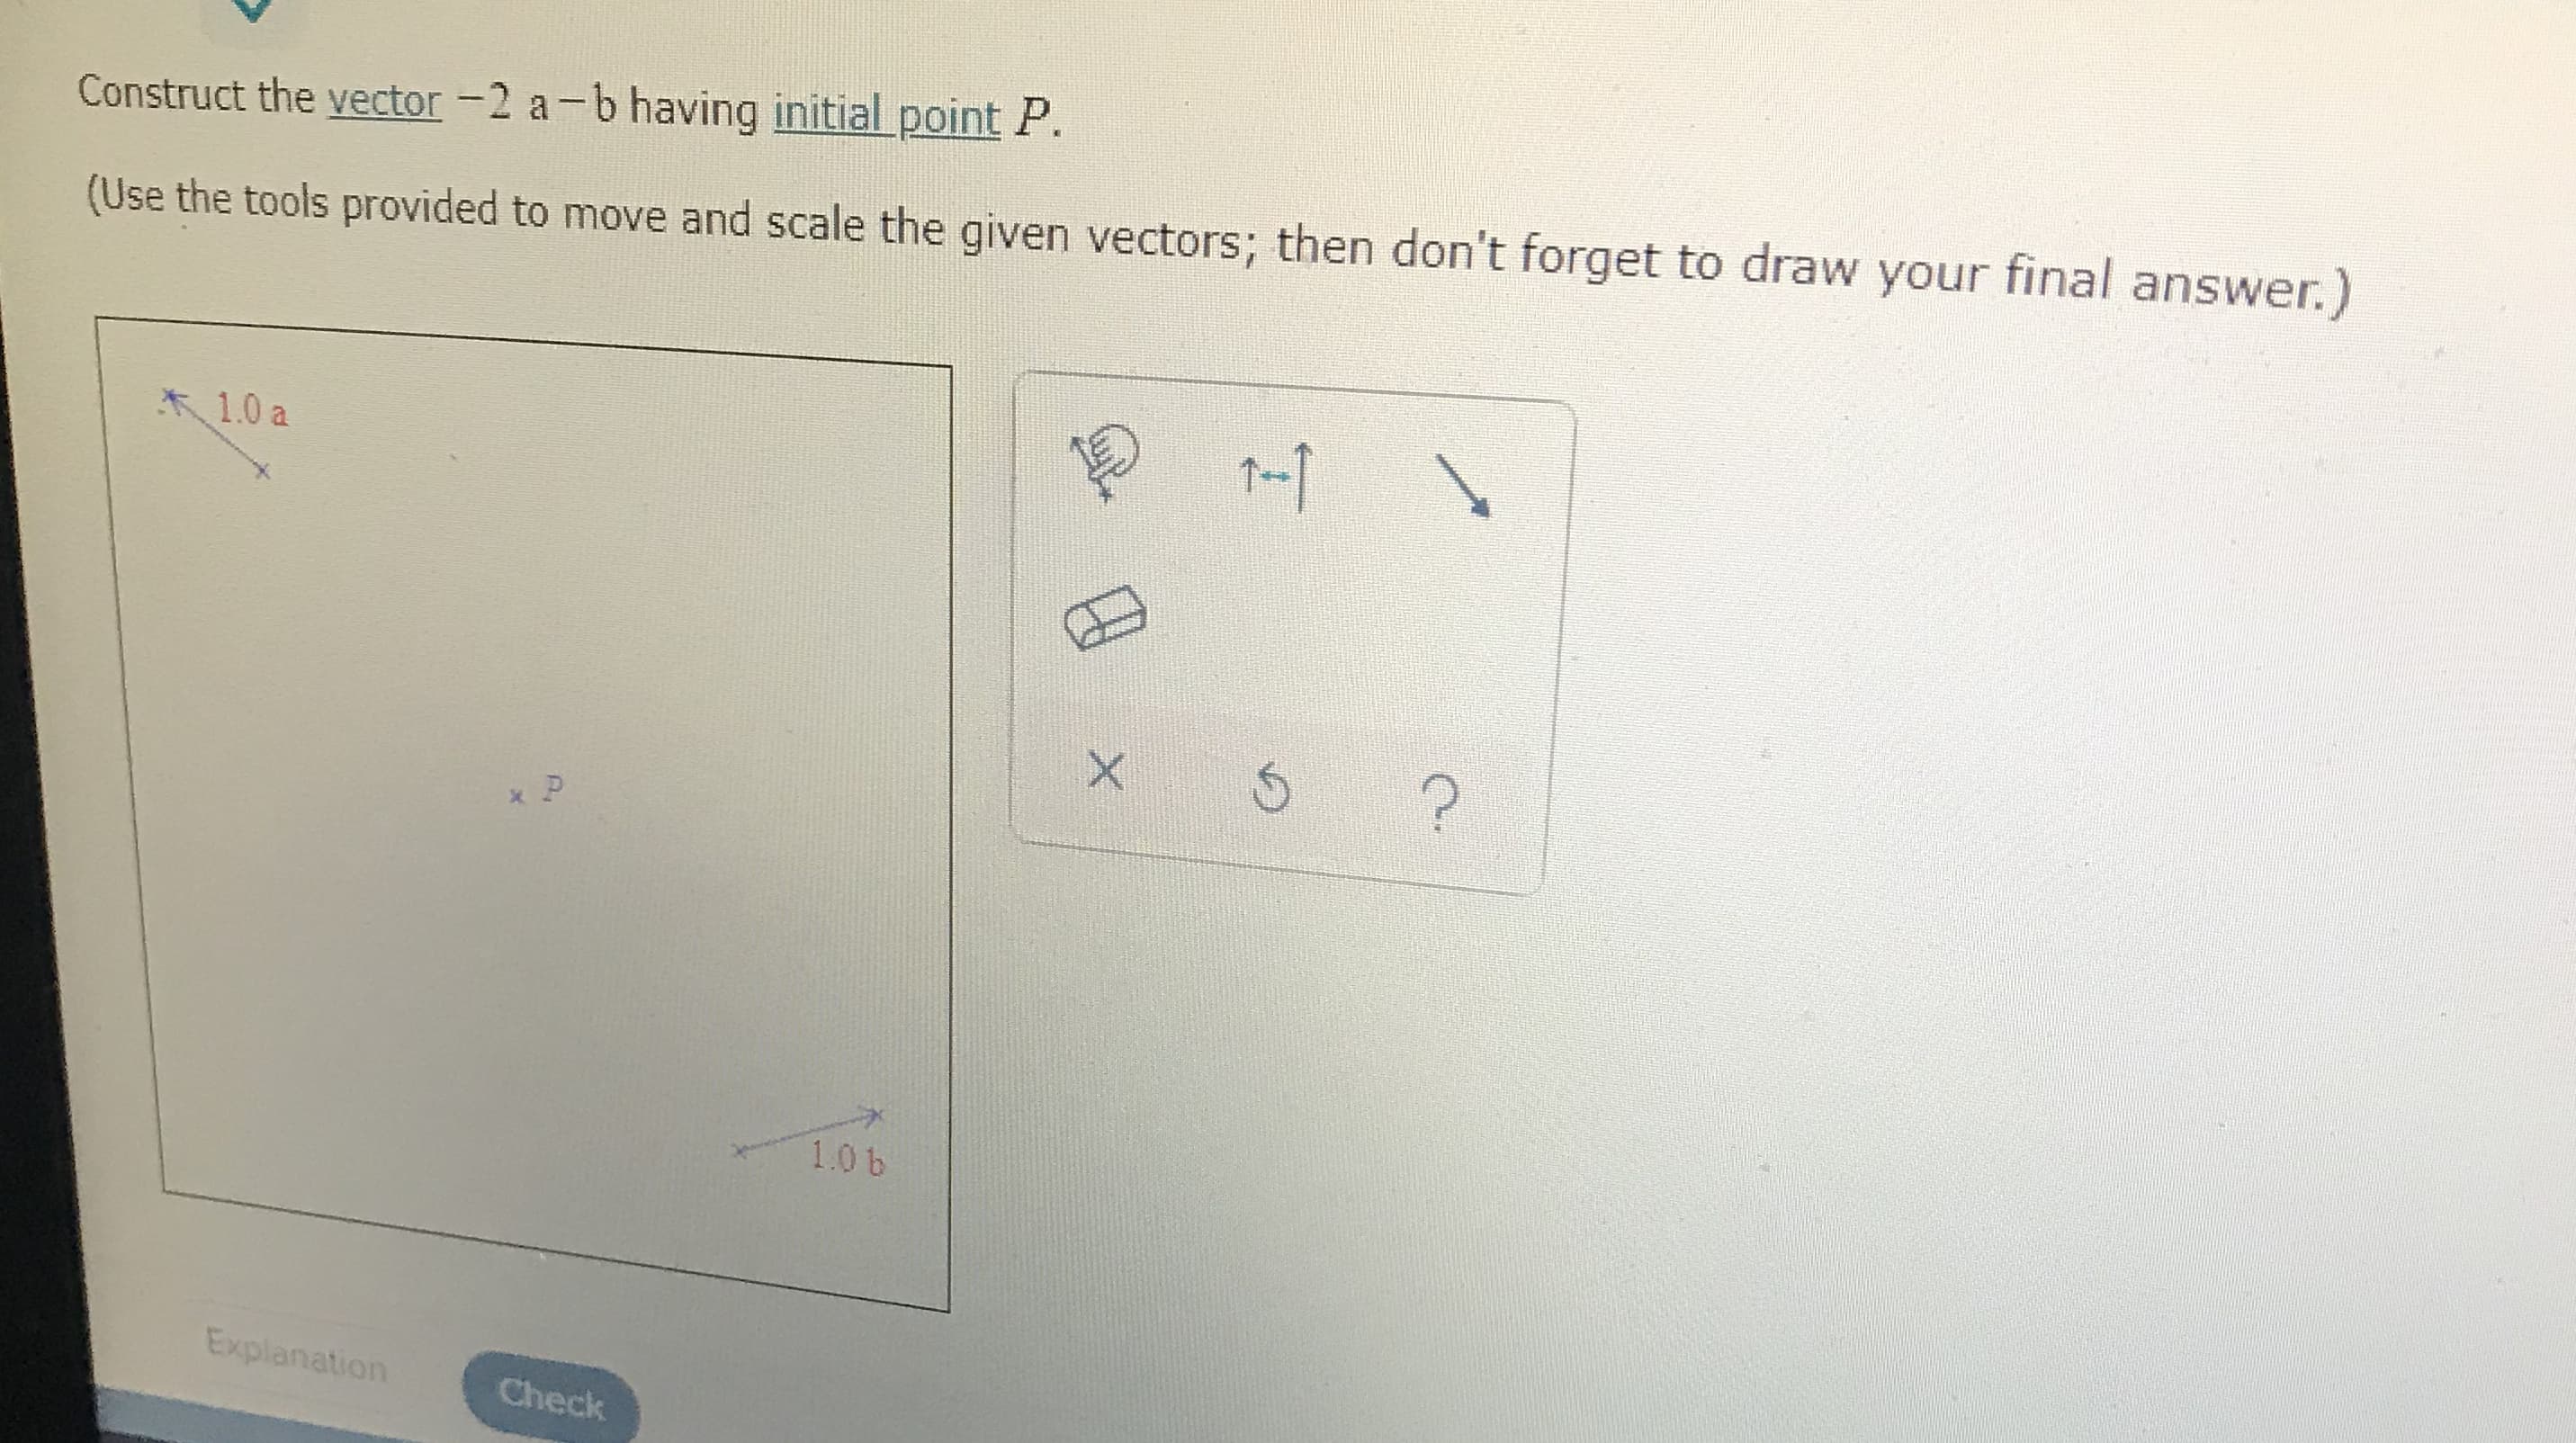 Construct the vector -2 a-b having initial point P.
(Use the tools provided to move and scale the given vectors; then don't forget to draw your final answer.)
*1.0 a
